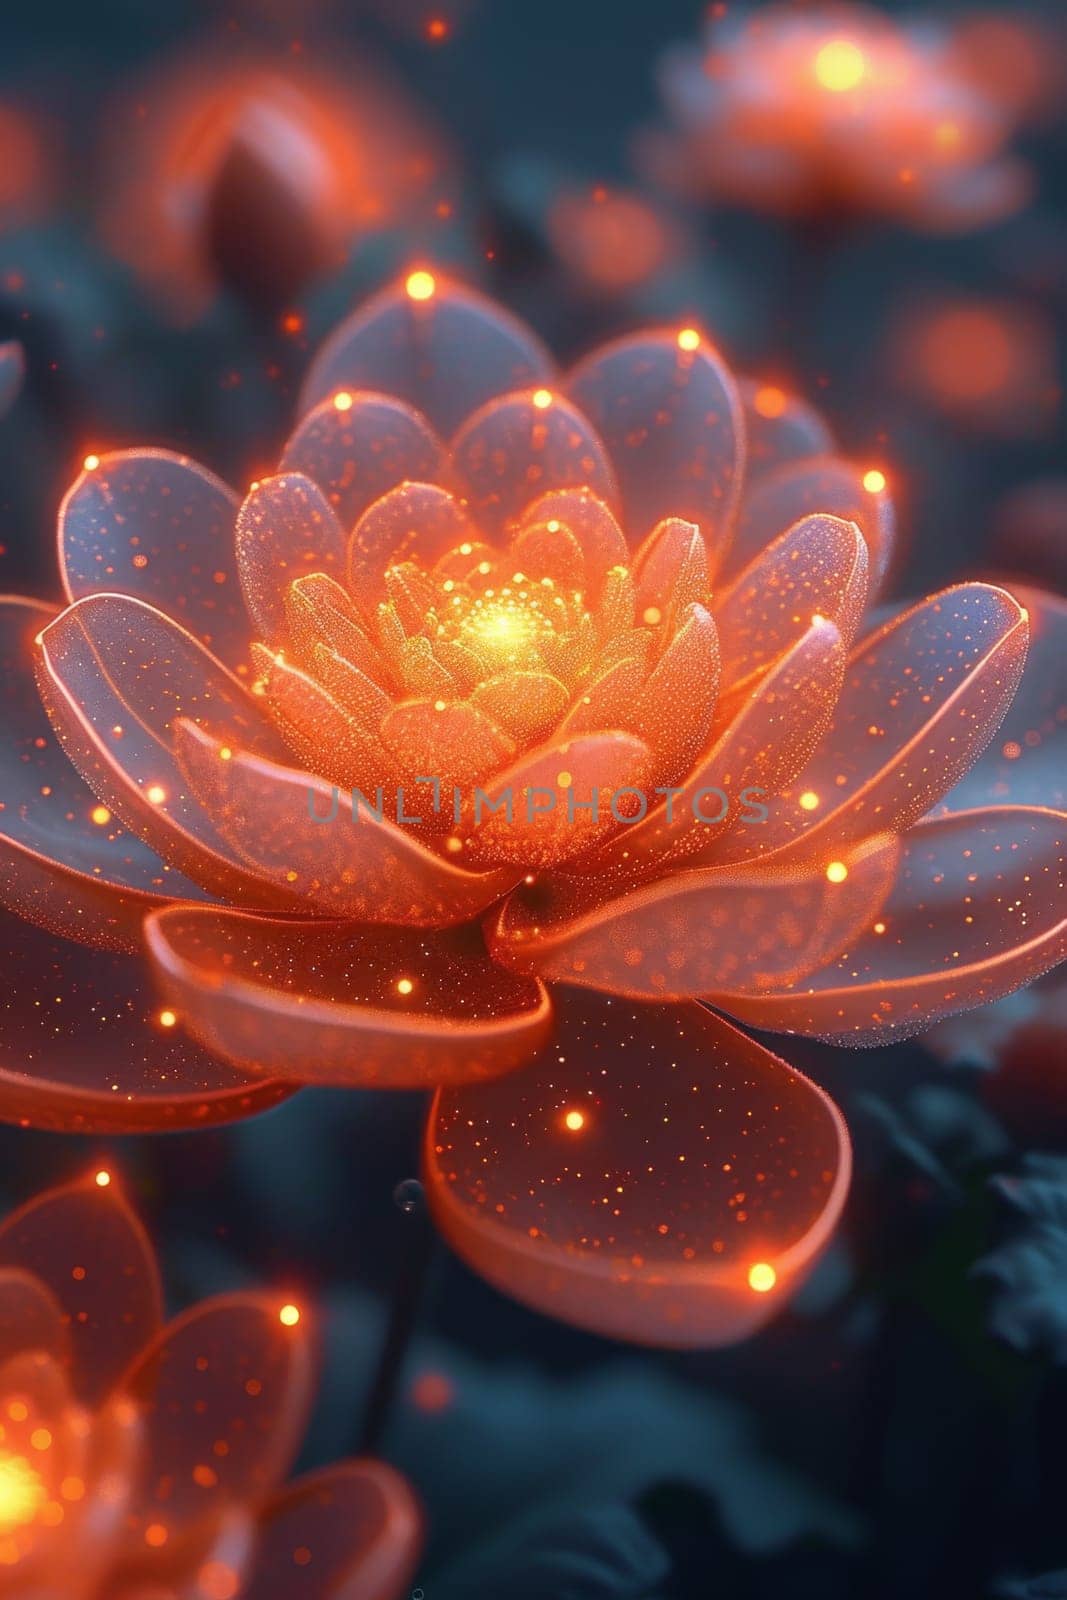 Abstract pink flower with petals. 3d illustration.